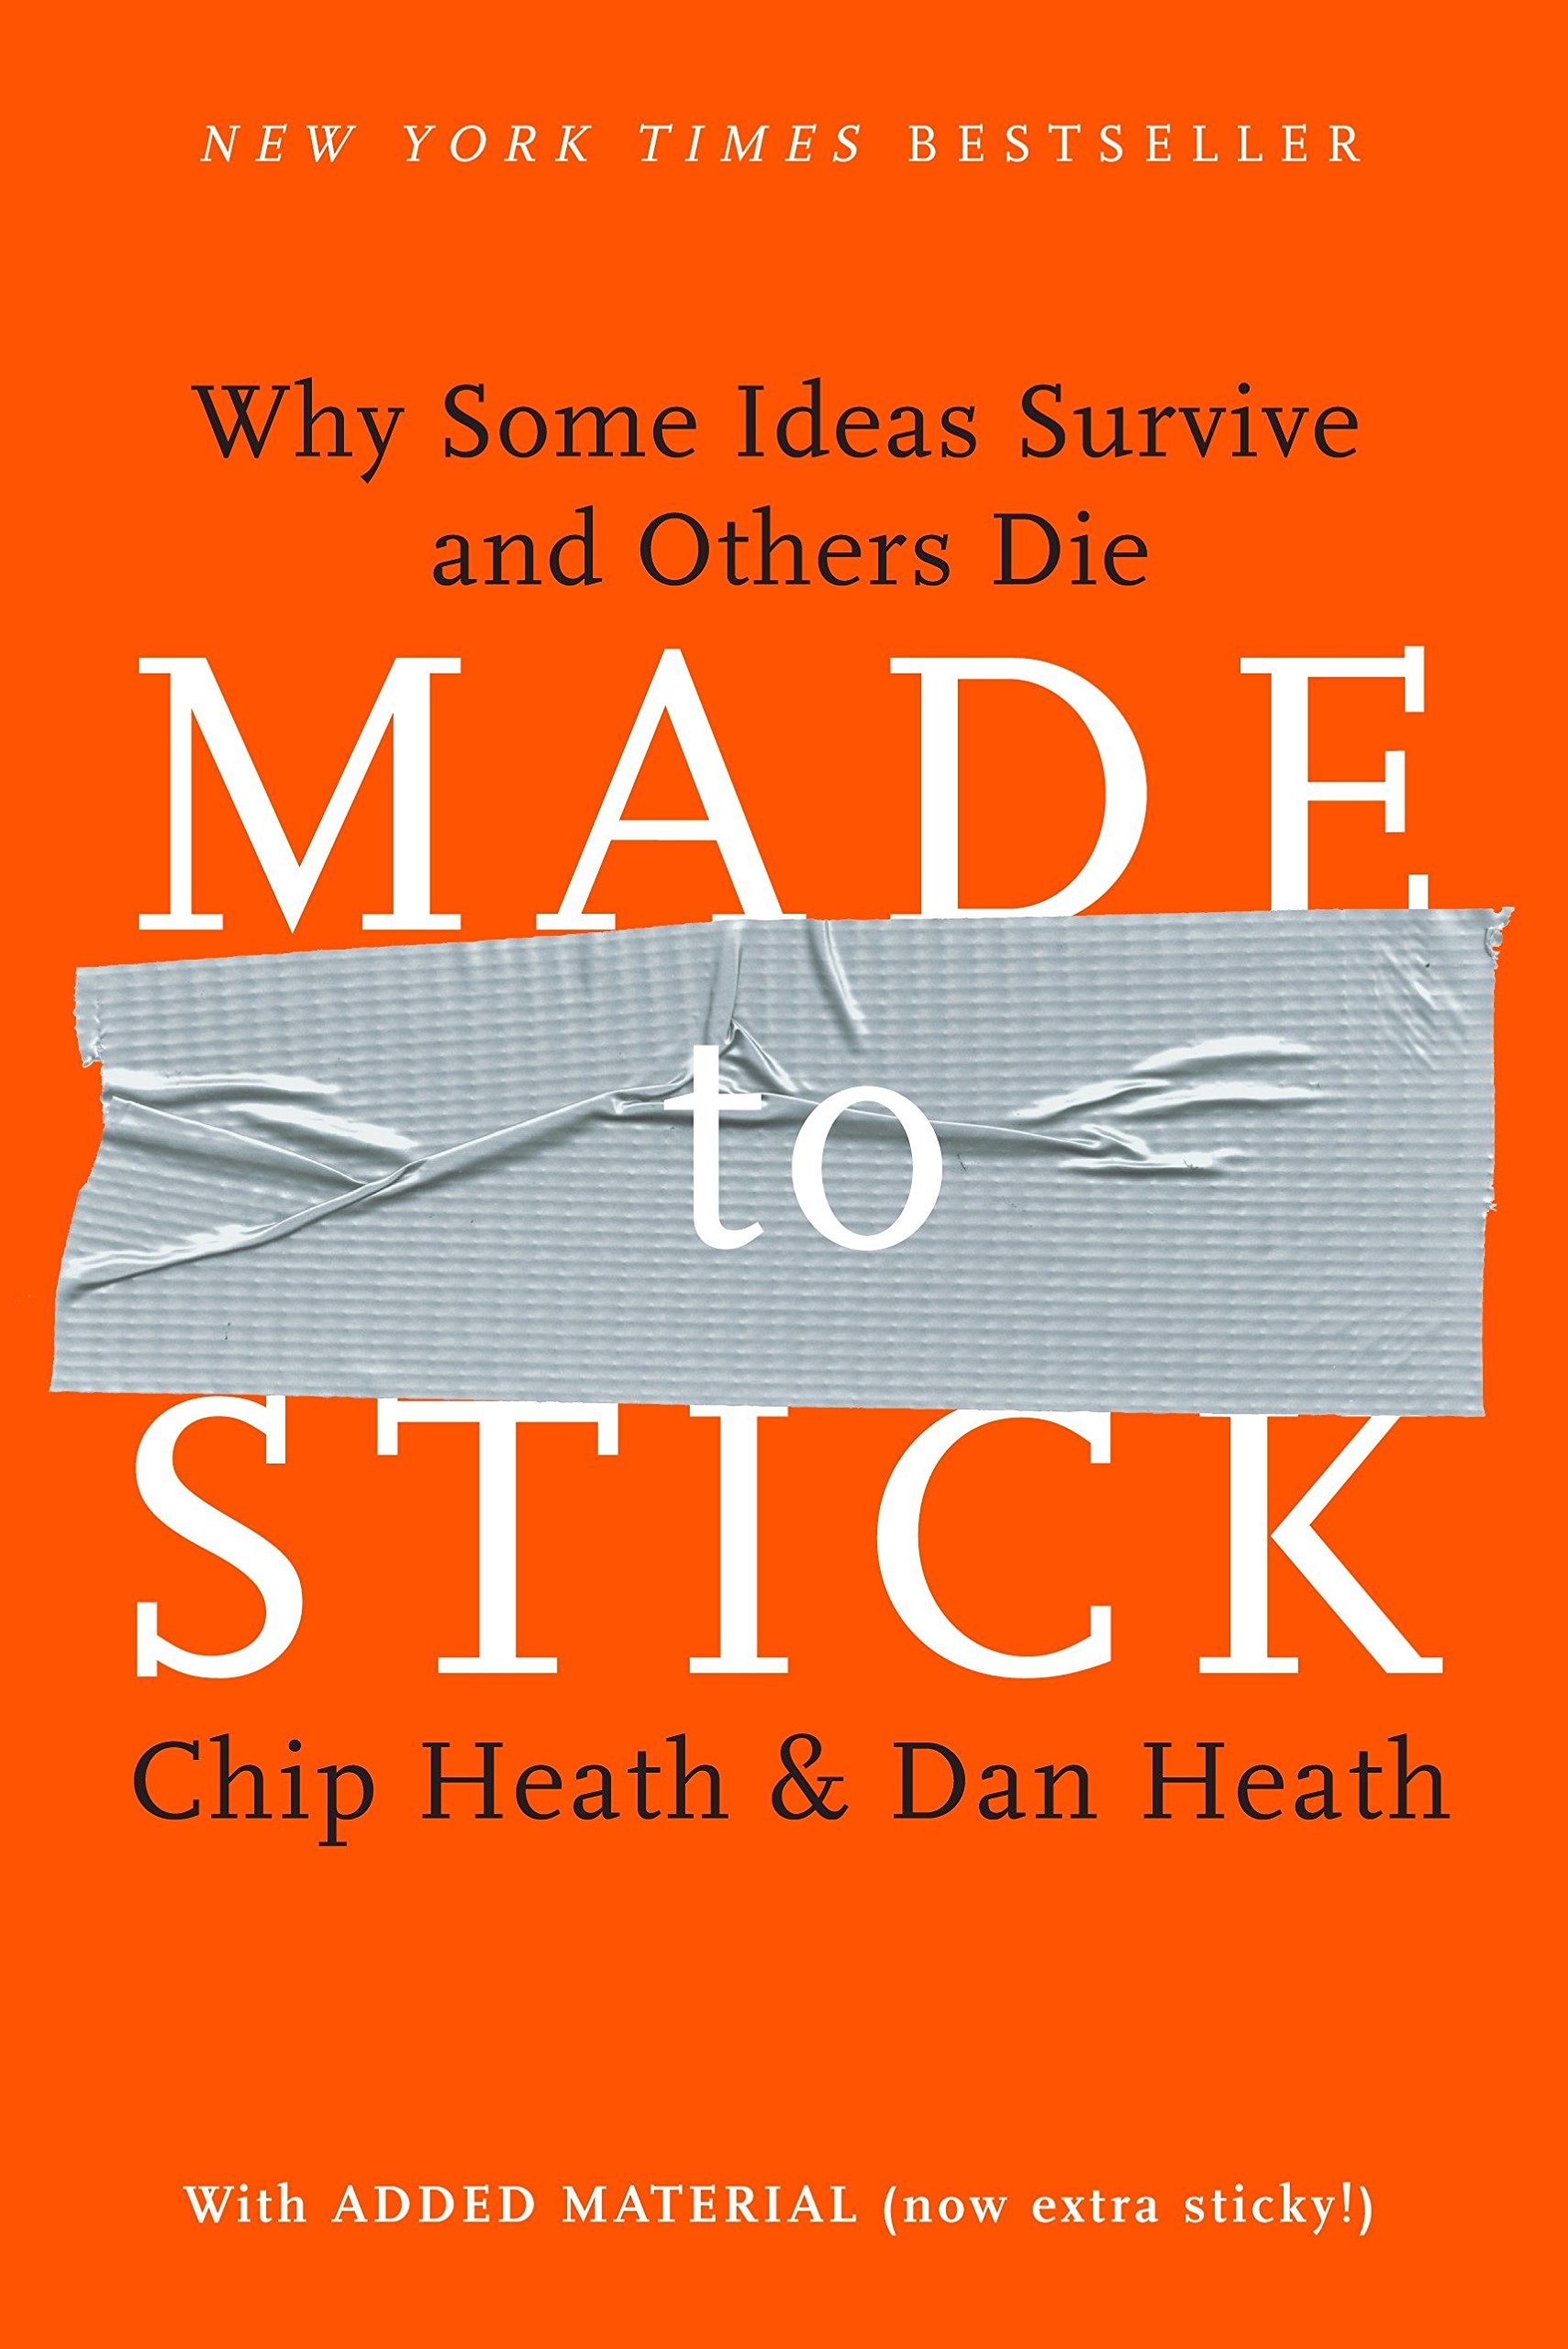 Cover of the book "Made to Stick"